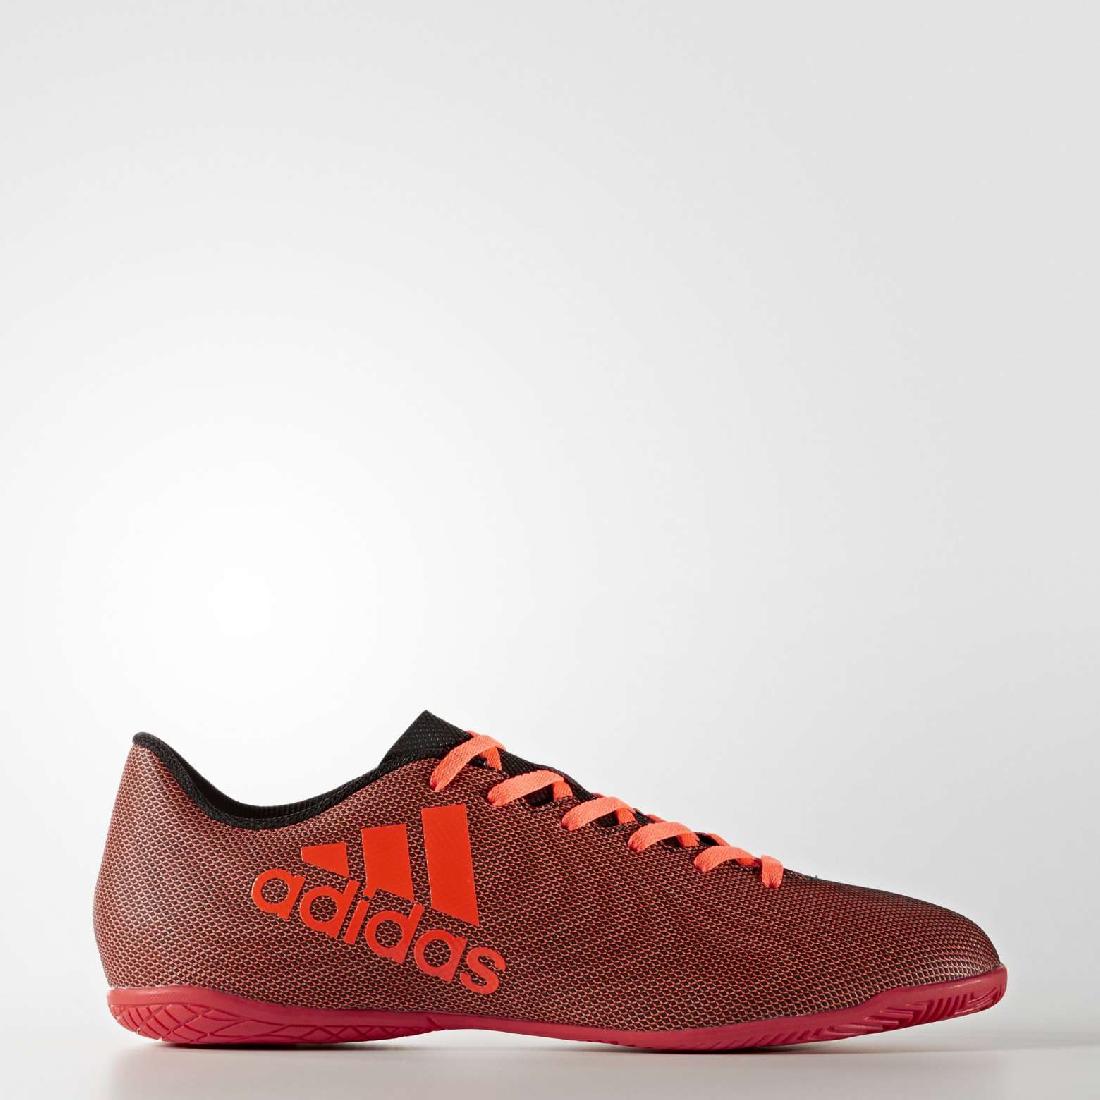  .  / ADIDAS X 17.4 IN S82406    